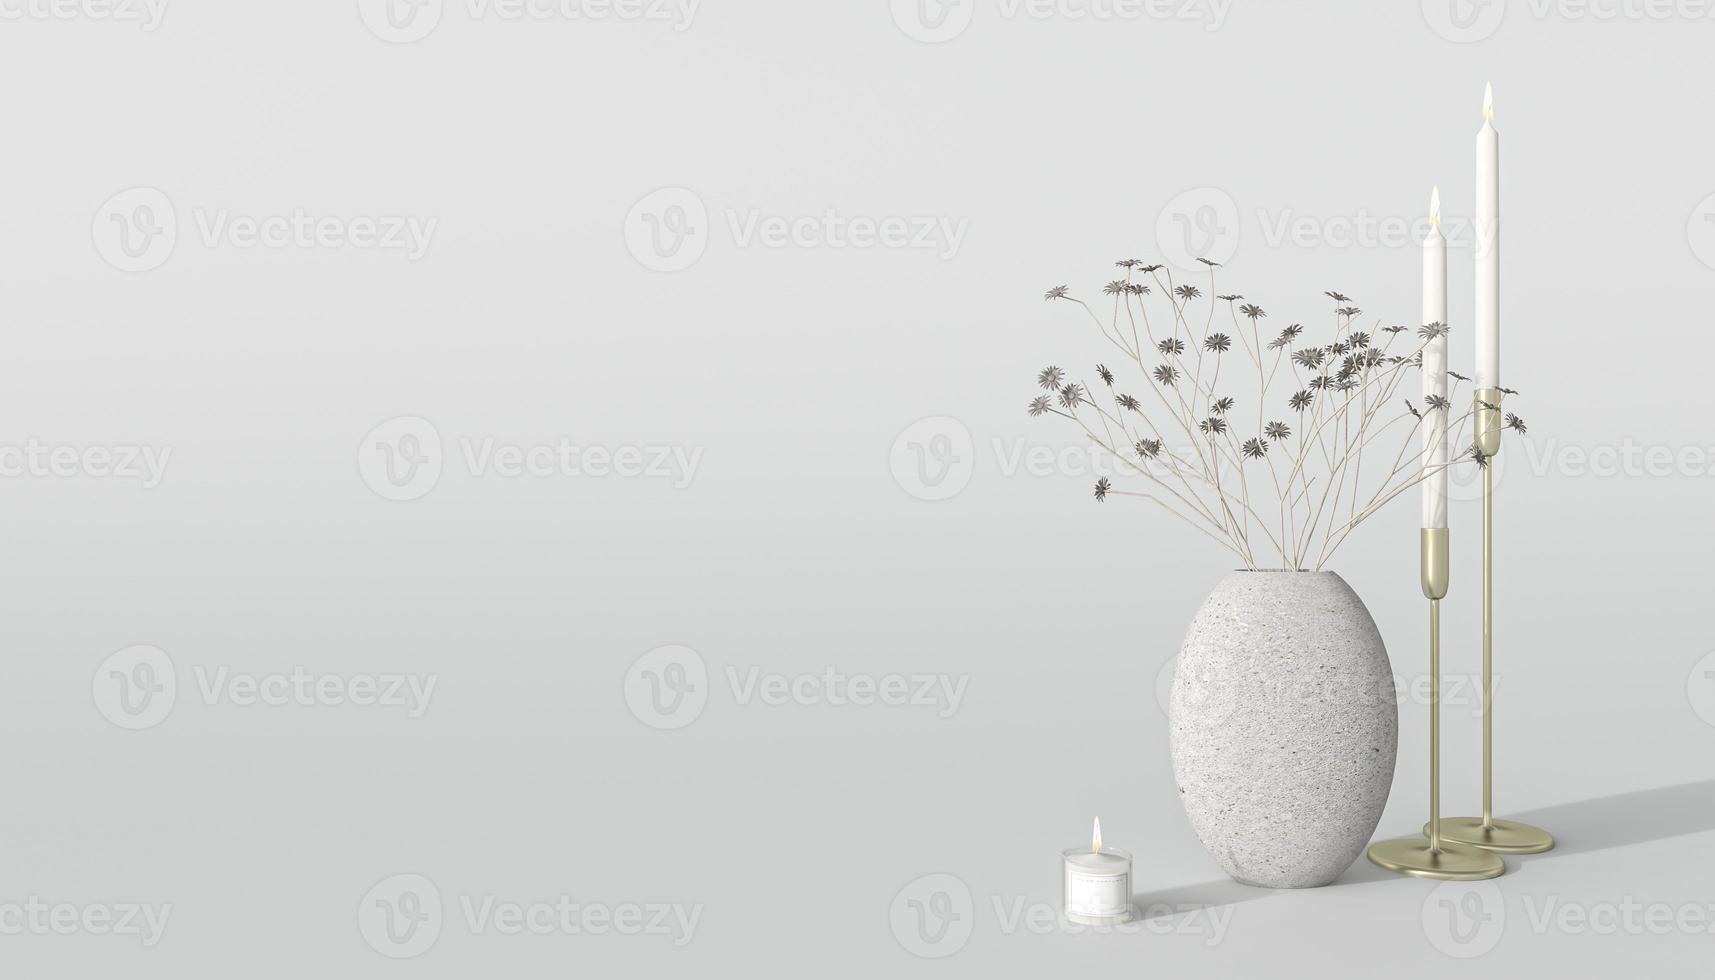 Minimal background decor with vase, candles and dry flower. Mockup scene with empty space. 3d render illustration for branding product presentation. photo